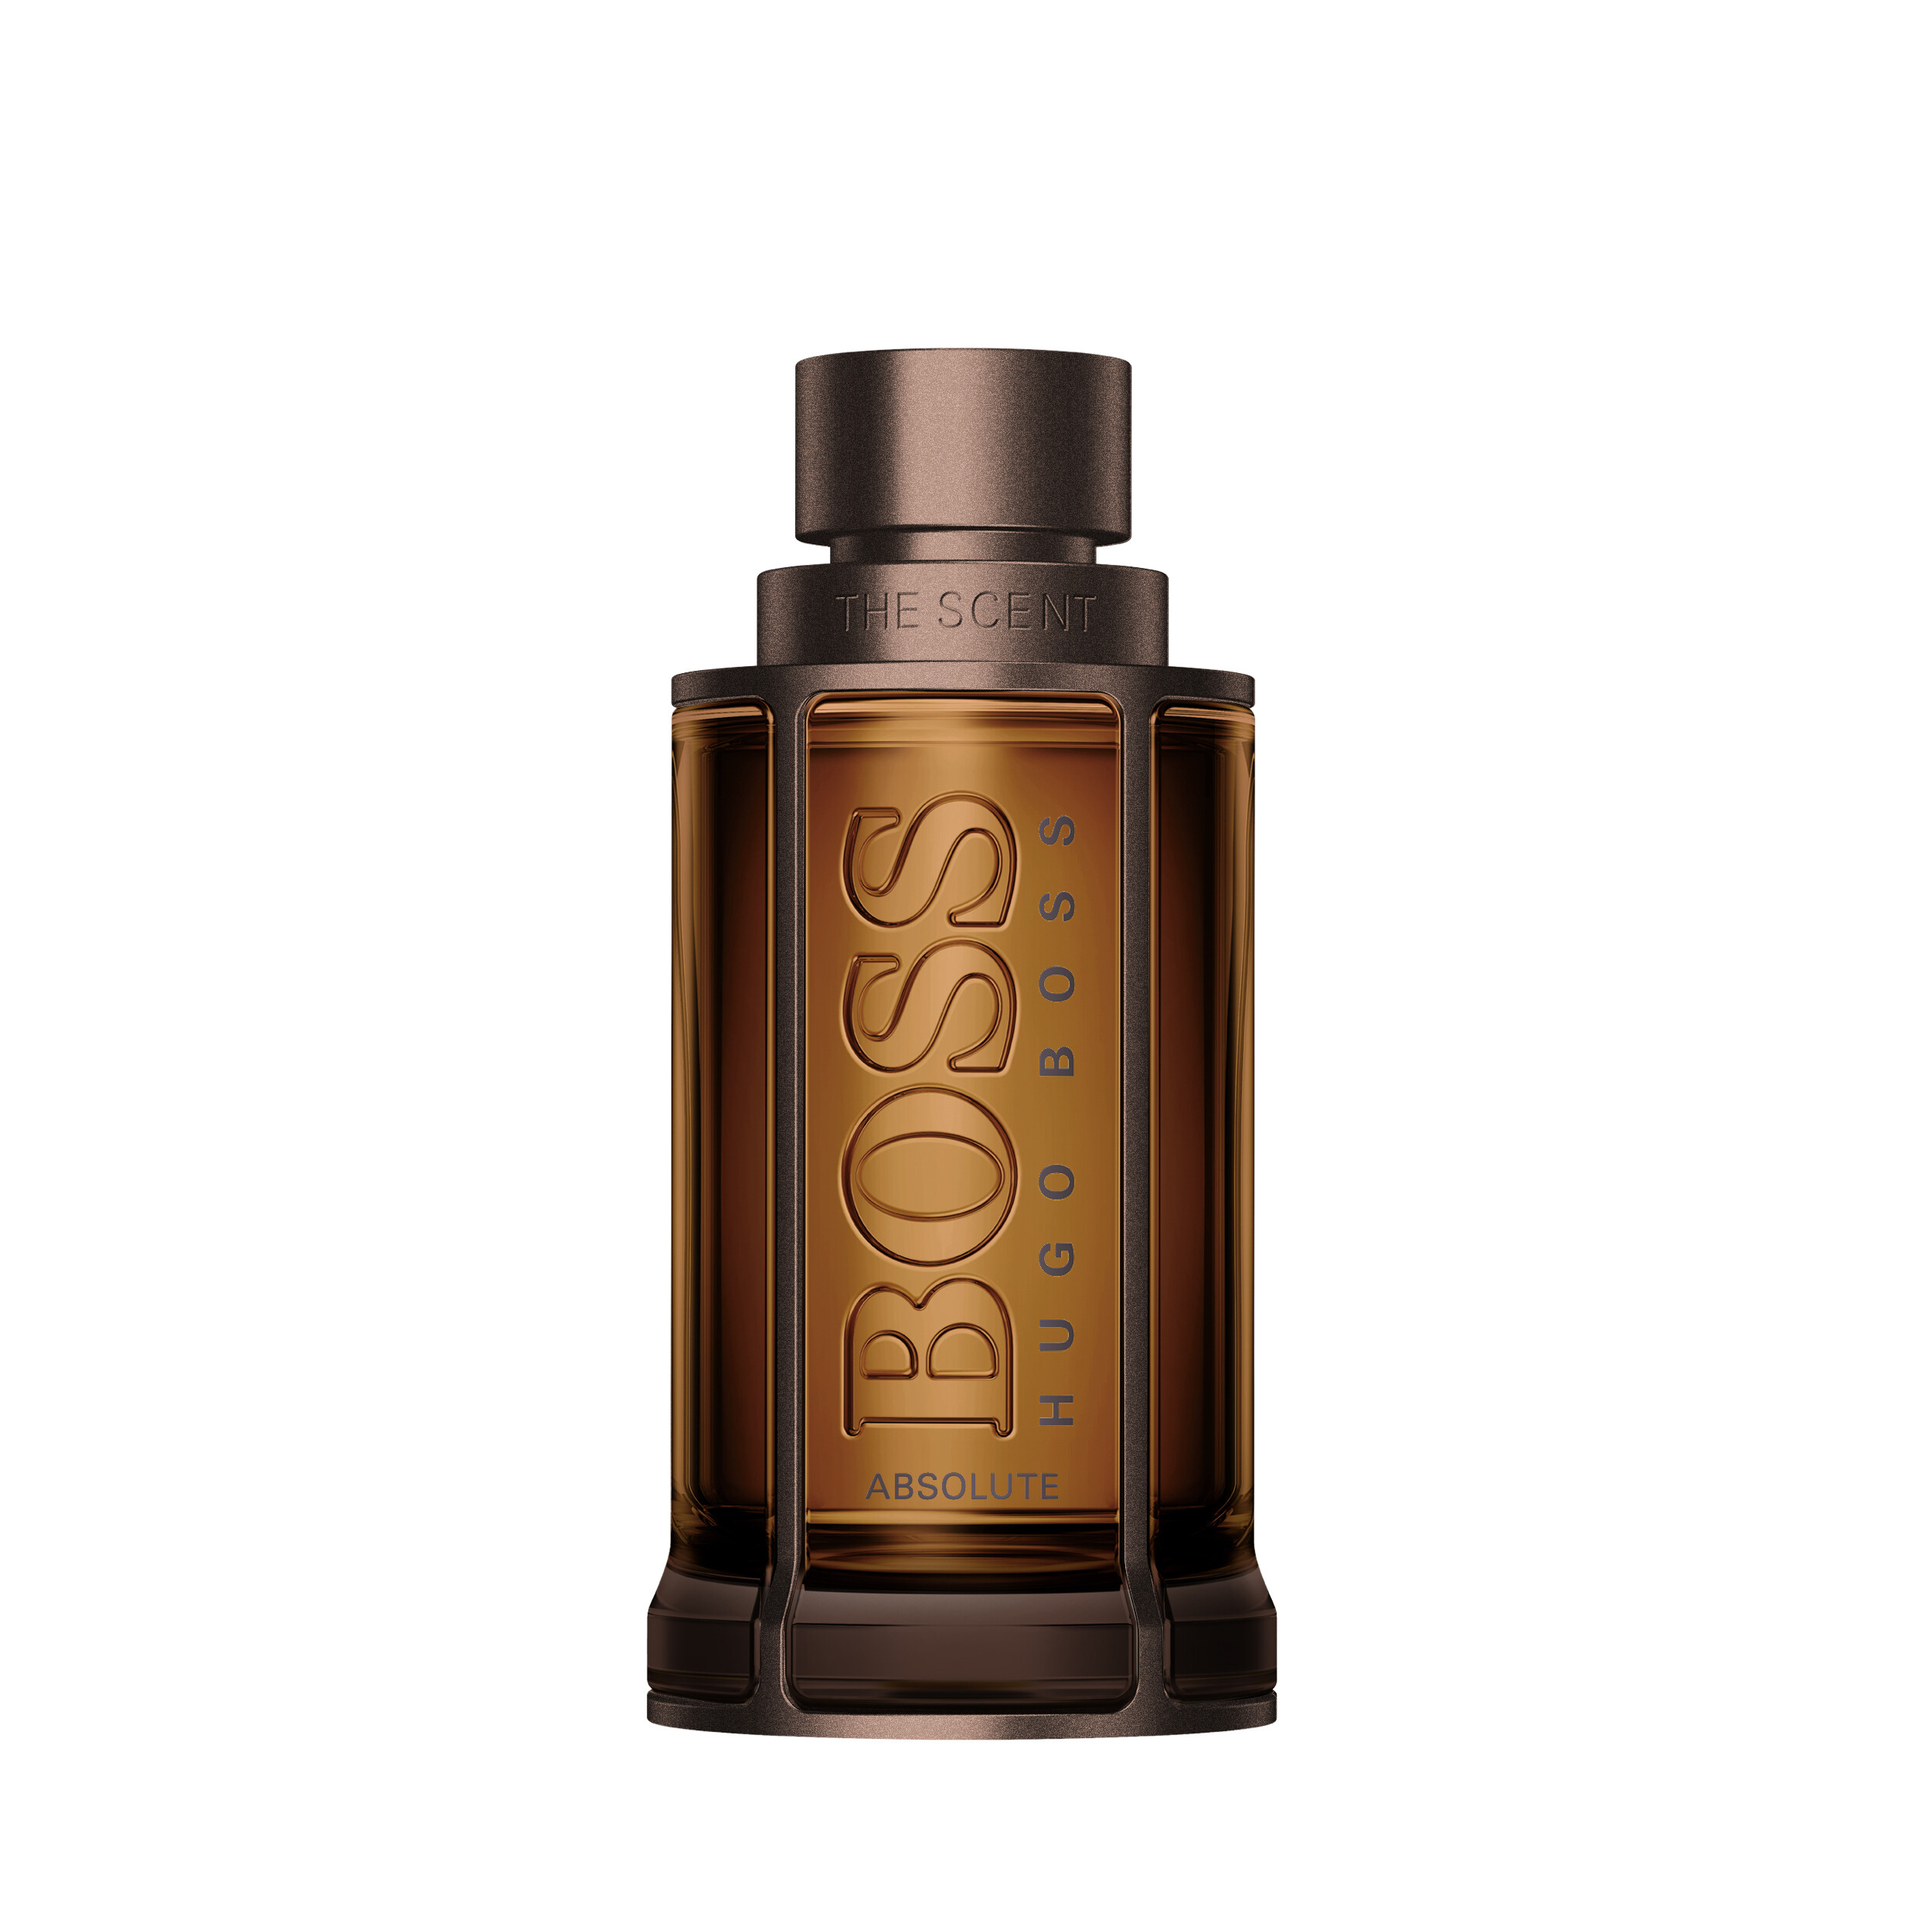 Hugo Boss BOSS THE SCENT Absolute For Him 100ml kaufen